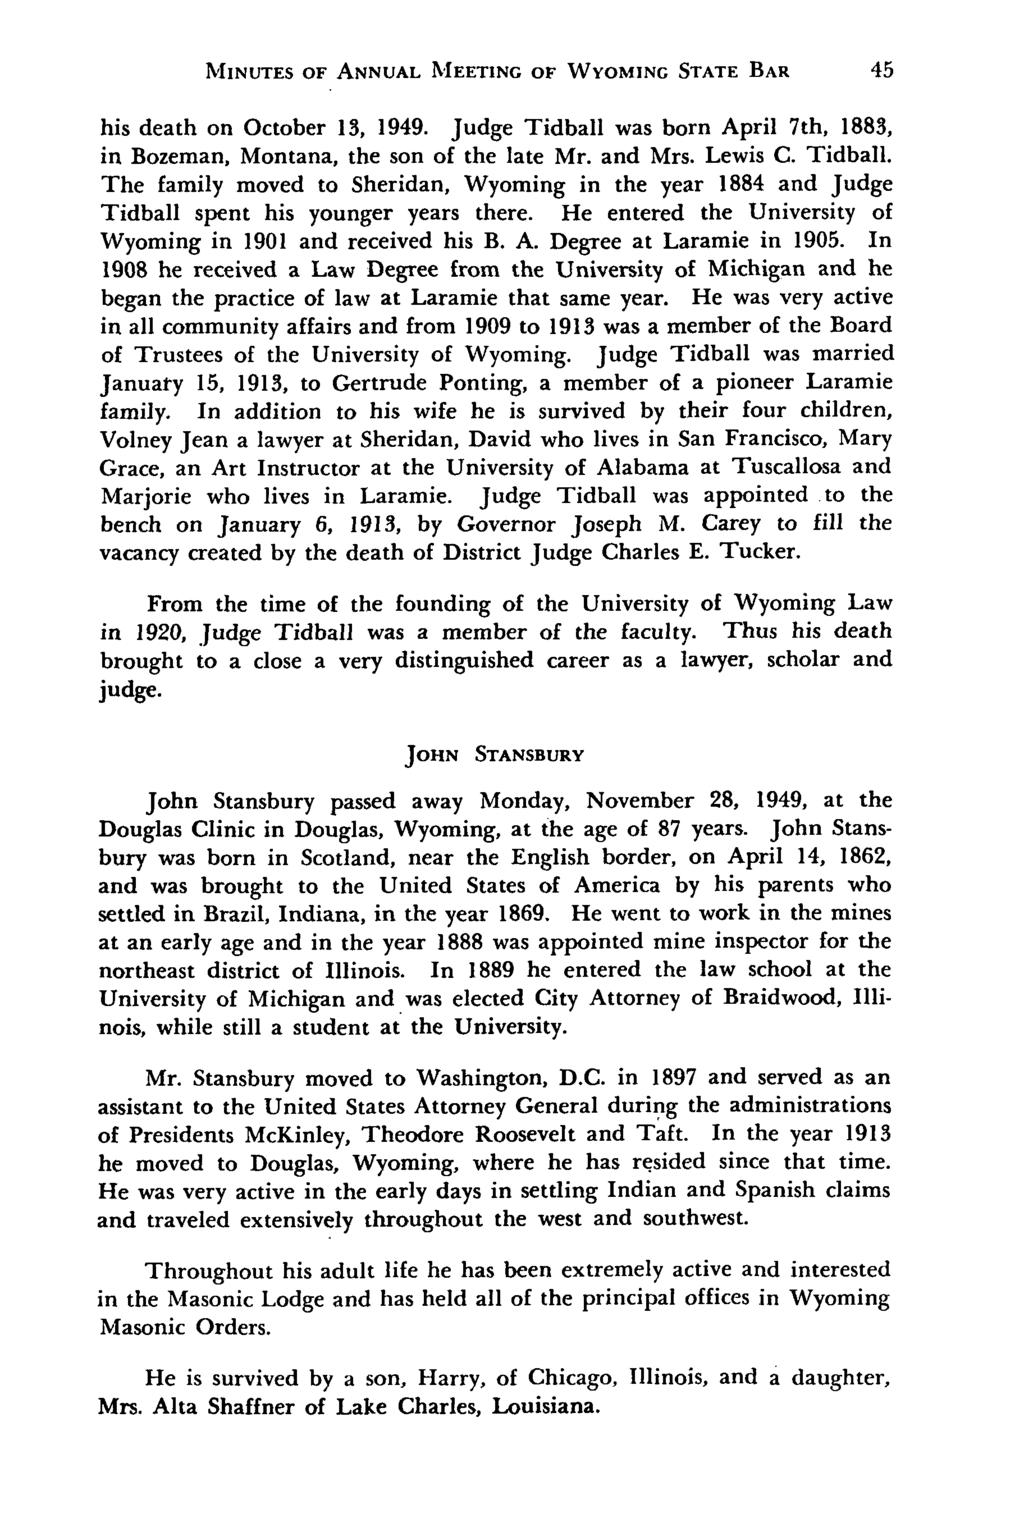 MINUTES OF ANNUAL MEETING OF WYOMING STATE BAR his death on October 13, 1949. Judge Tidball was born April 7th, 1883, in Bozeman, Montana, the son of the late Mr. and Mrs. Lewis C. Tidball. The family moved to Sheridan, Wyoming in the year 1884 and Judge Tidball spent his younger years there.